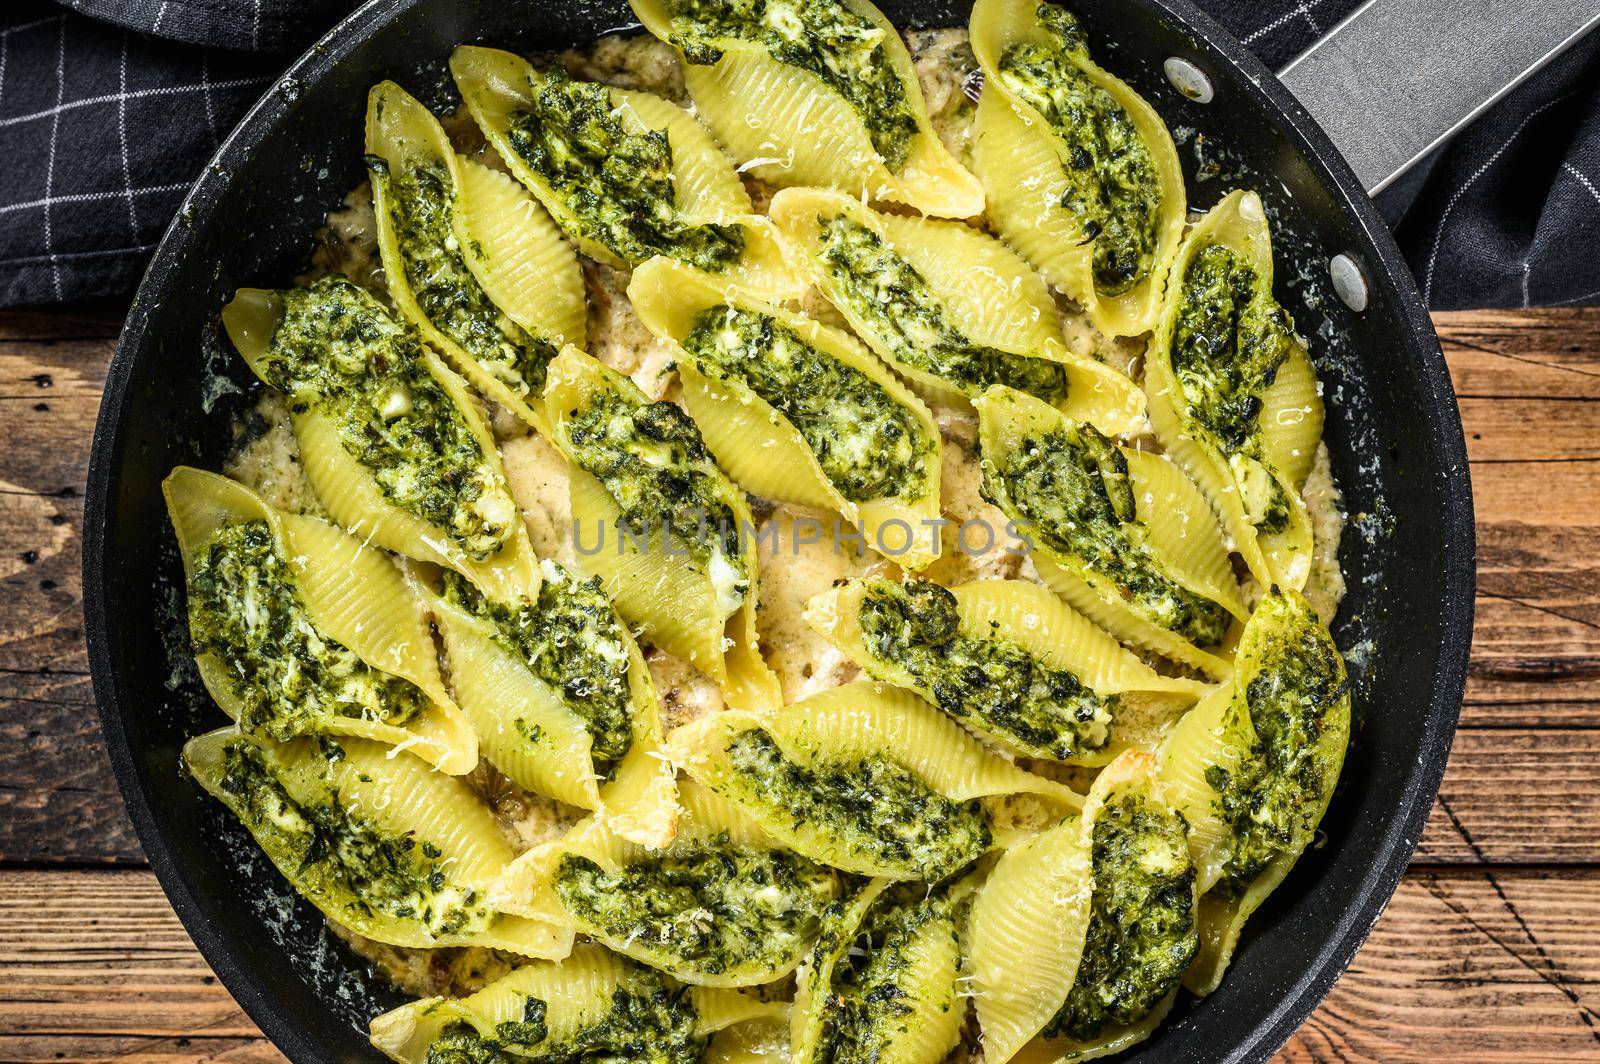 Pasta shells Conchiglioni stuffed with spinach and cheese baked with sauce in a pan. Wooden background. Top view by Composter